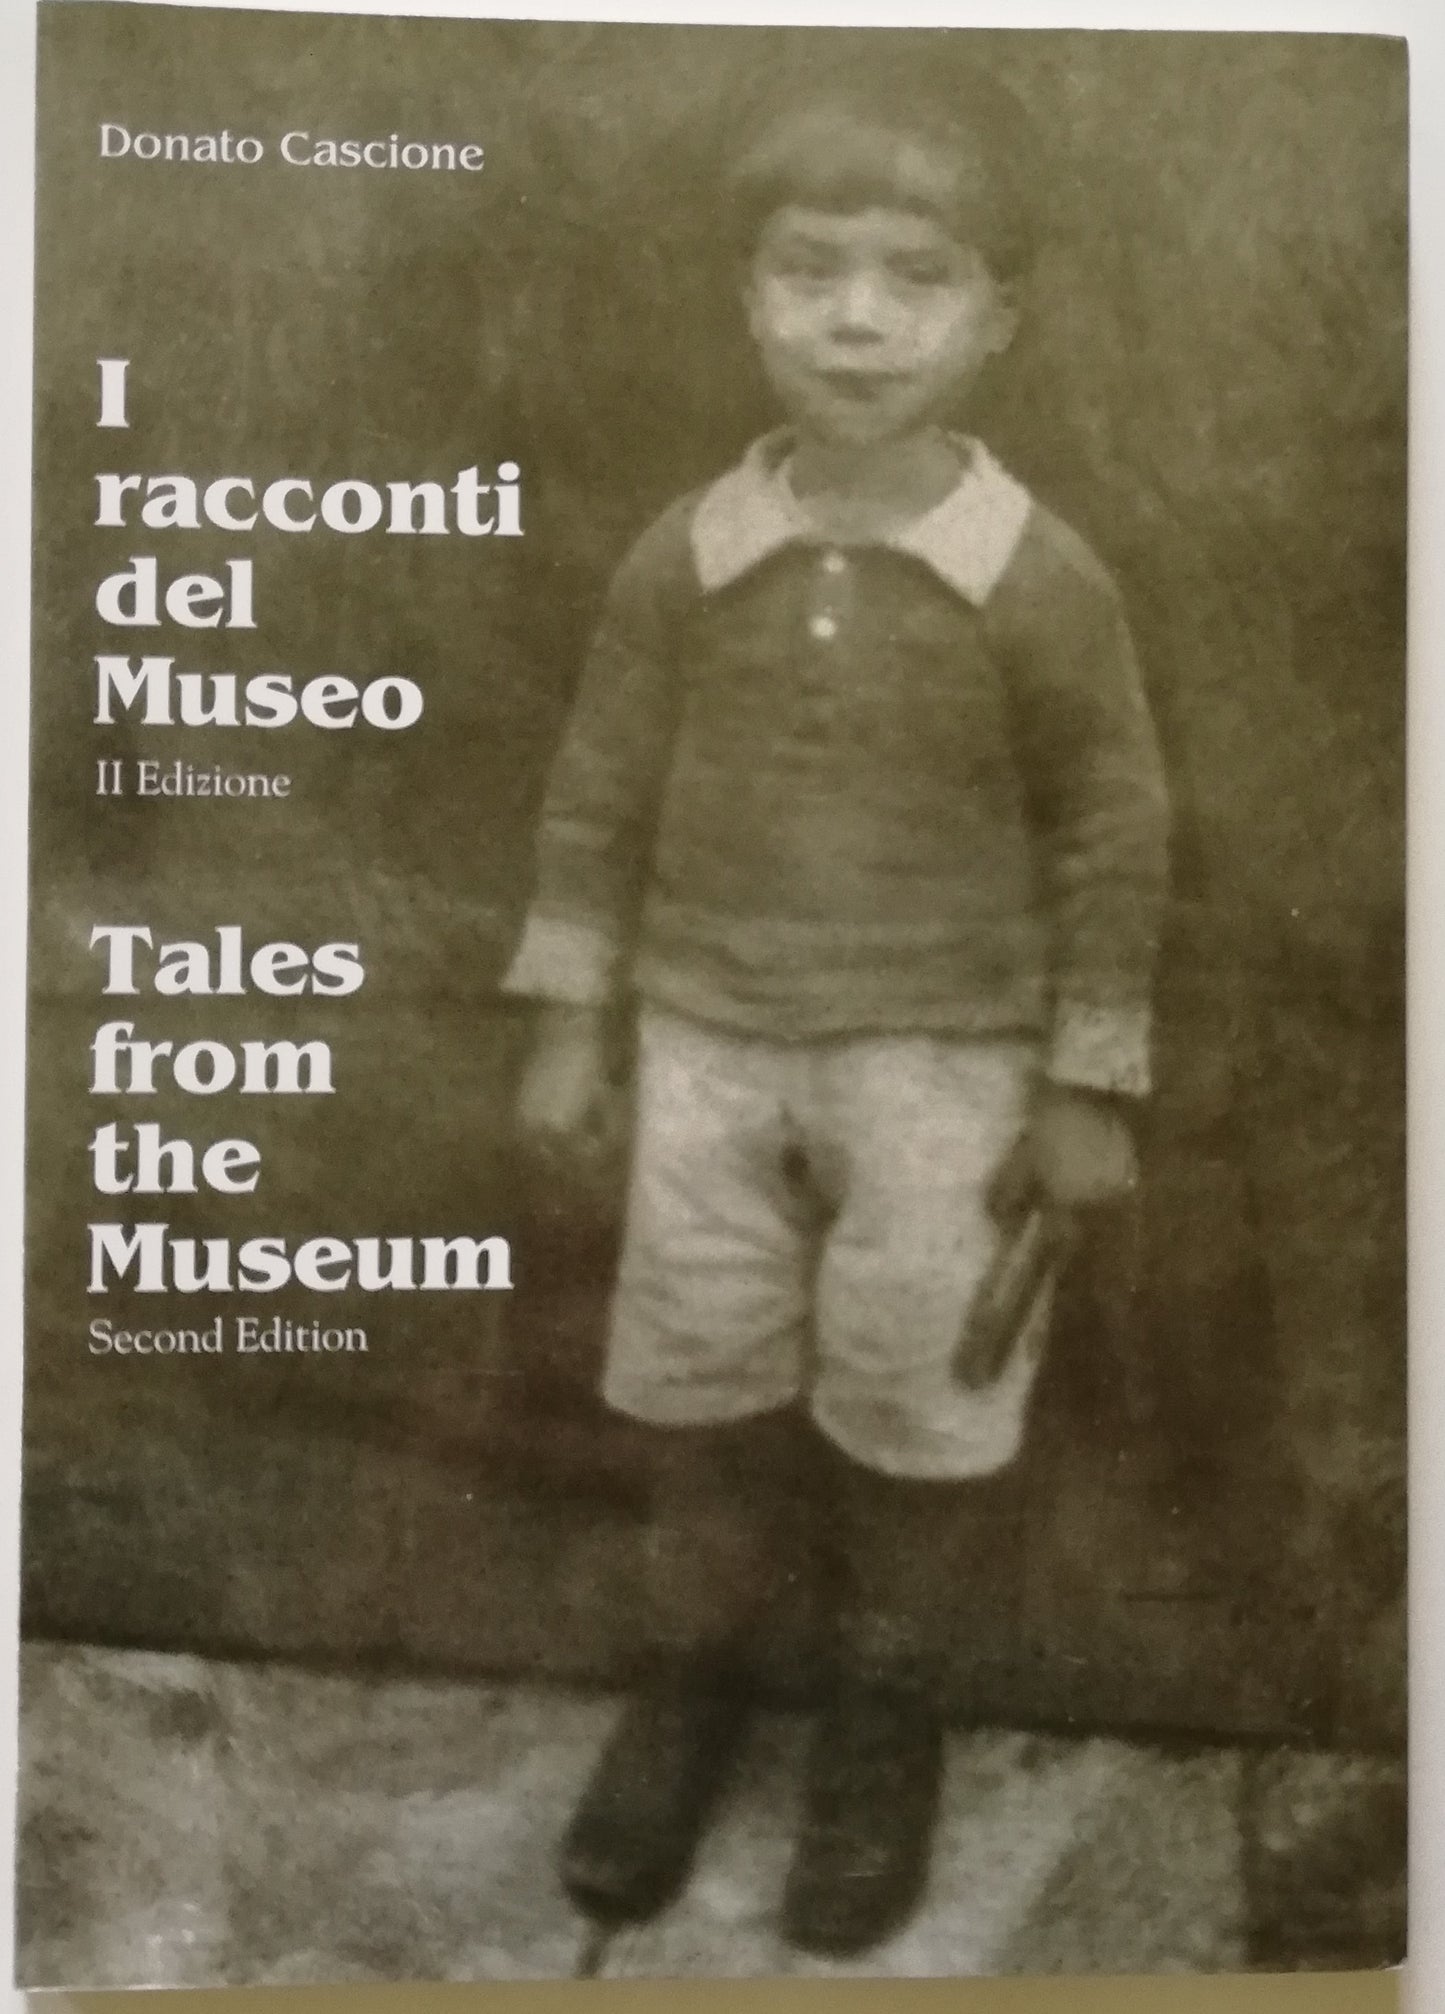 I racconti del Museo - Tales from the Museum